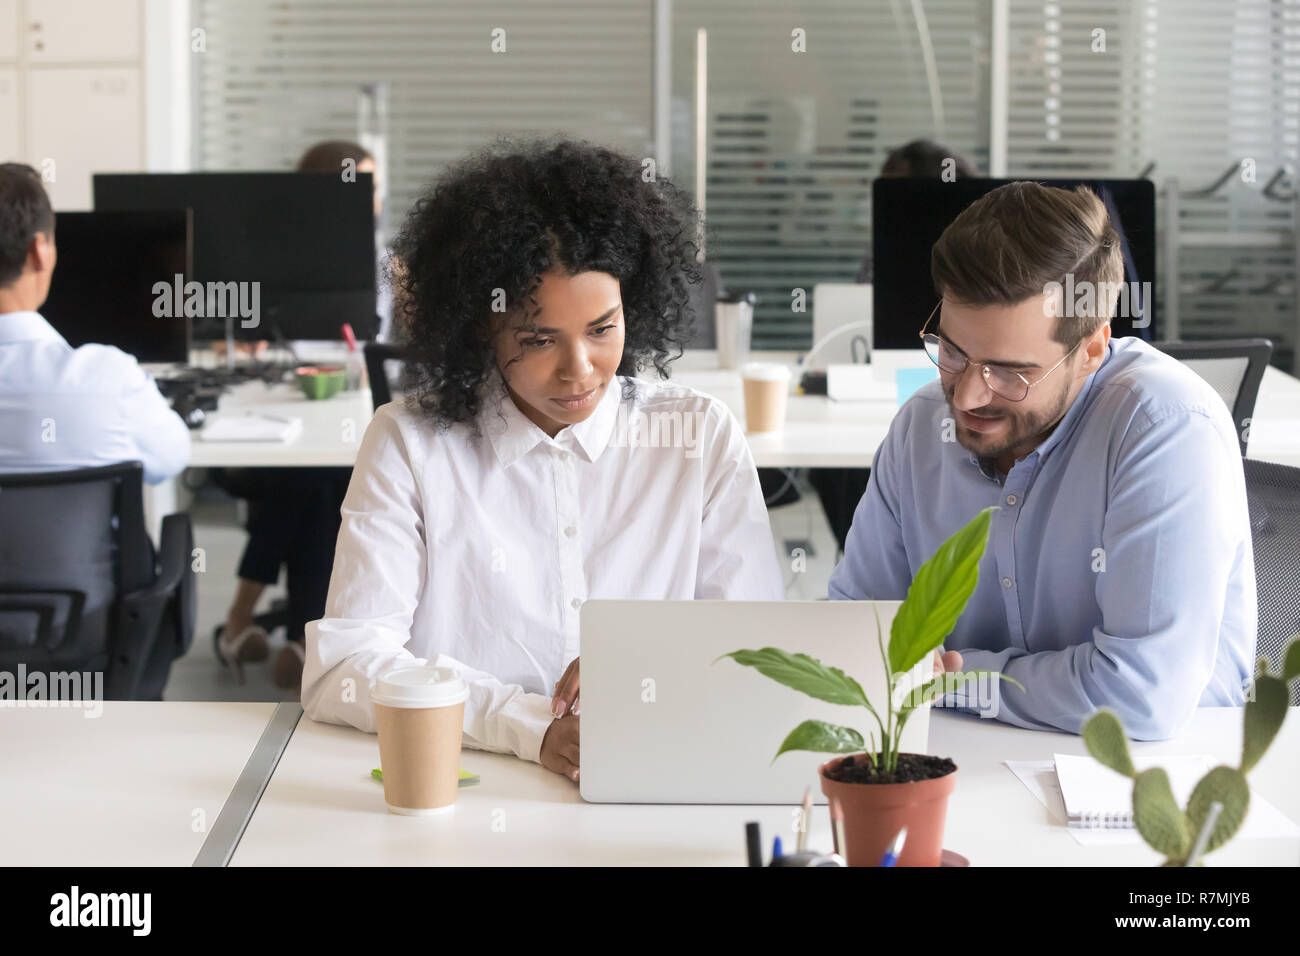 Diverse colleagues discussing computer work at workplace Stock Photo